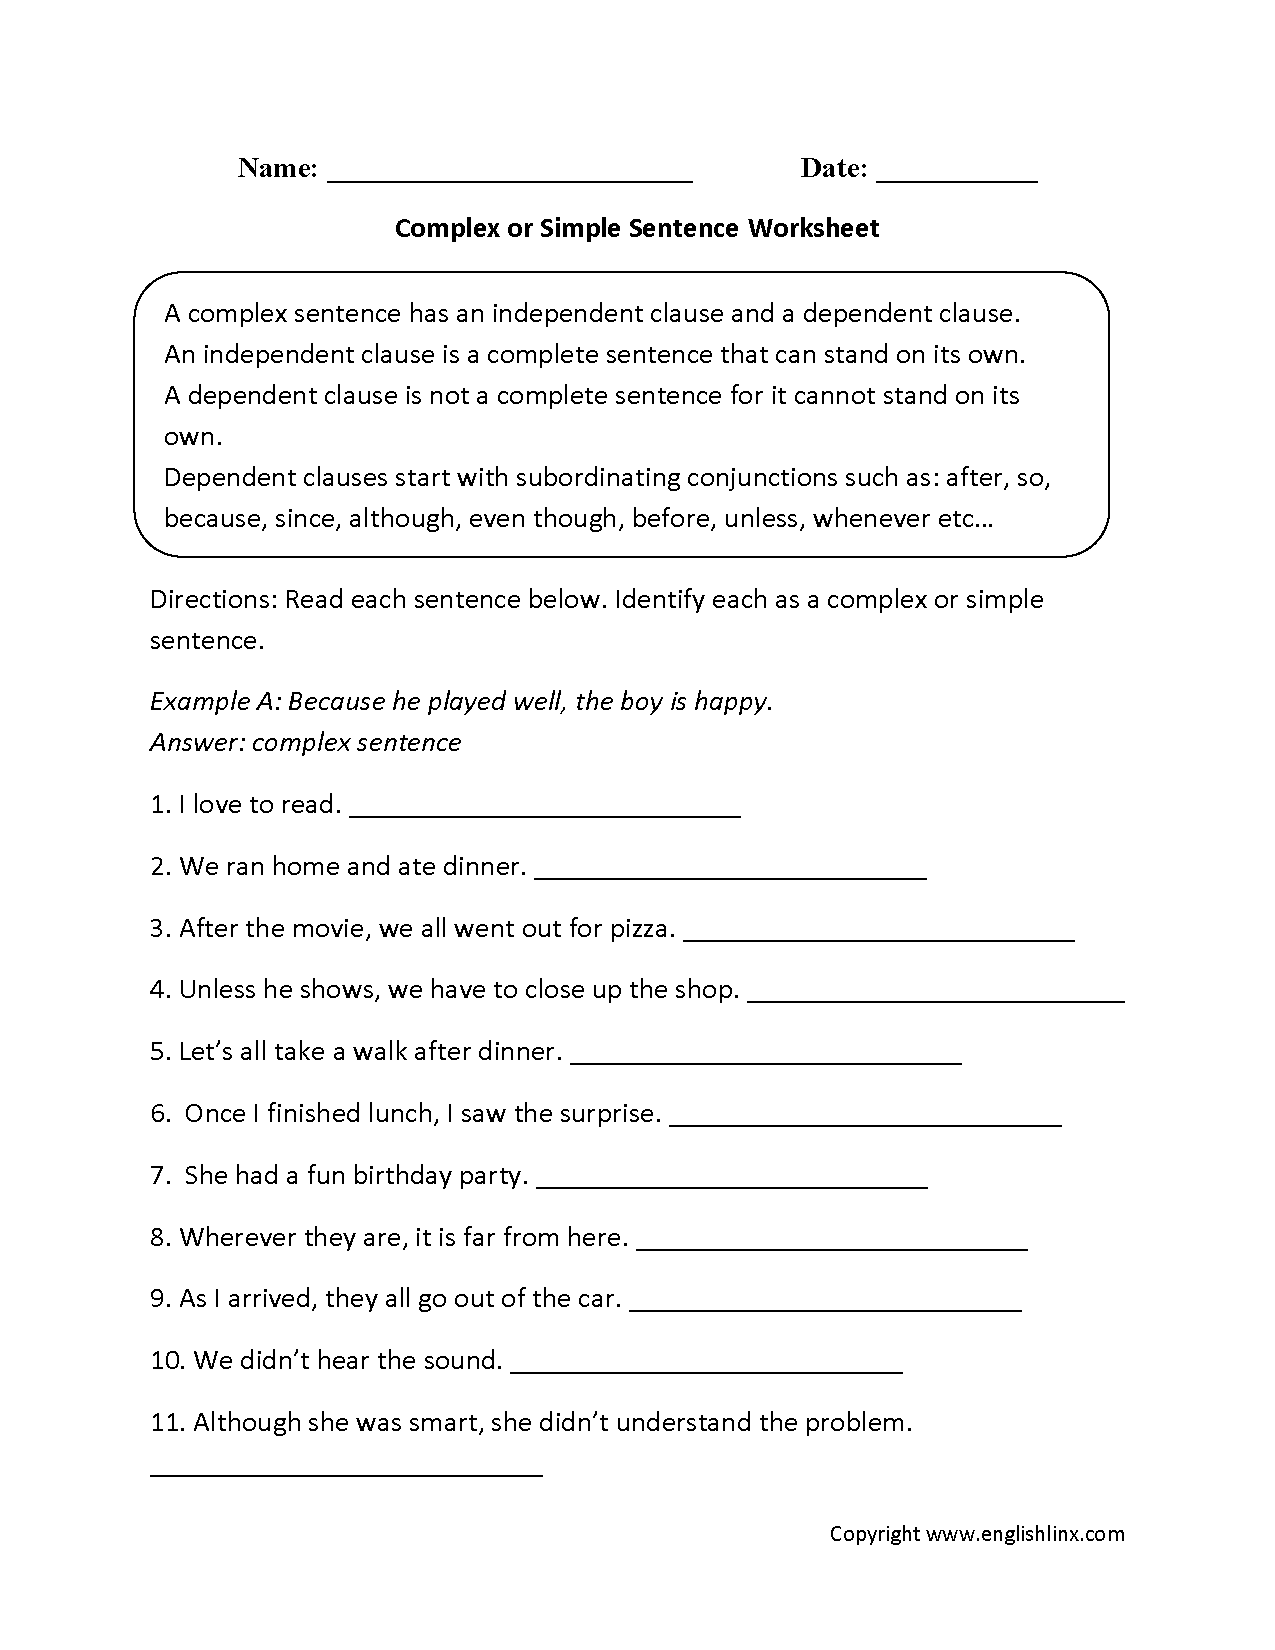 Simple and Compound Sentences Worksheets Image